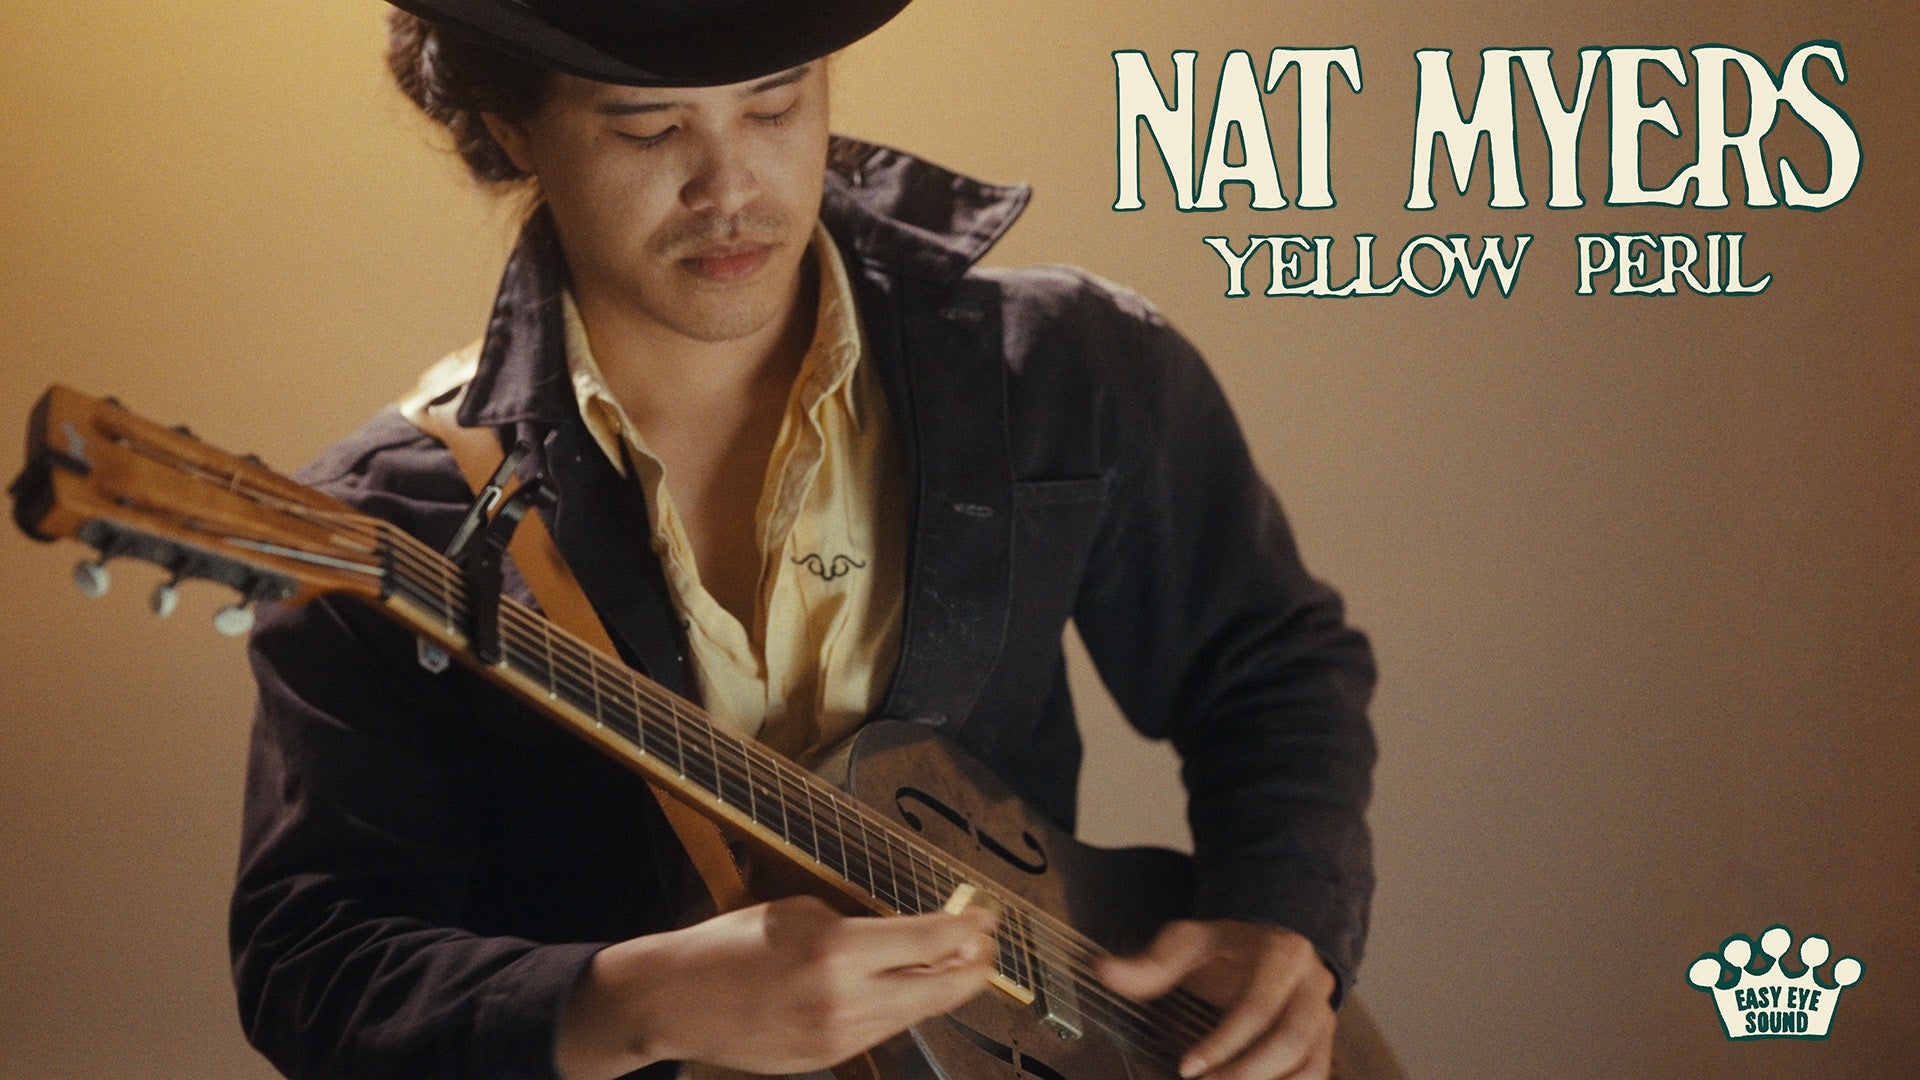 NAT MYERS MAKES HIS EASY EYE SOUND DEBUT WITH THE TITLE TRACK, “YELLOW PERIL”